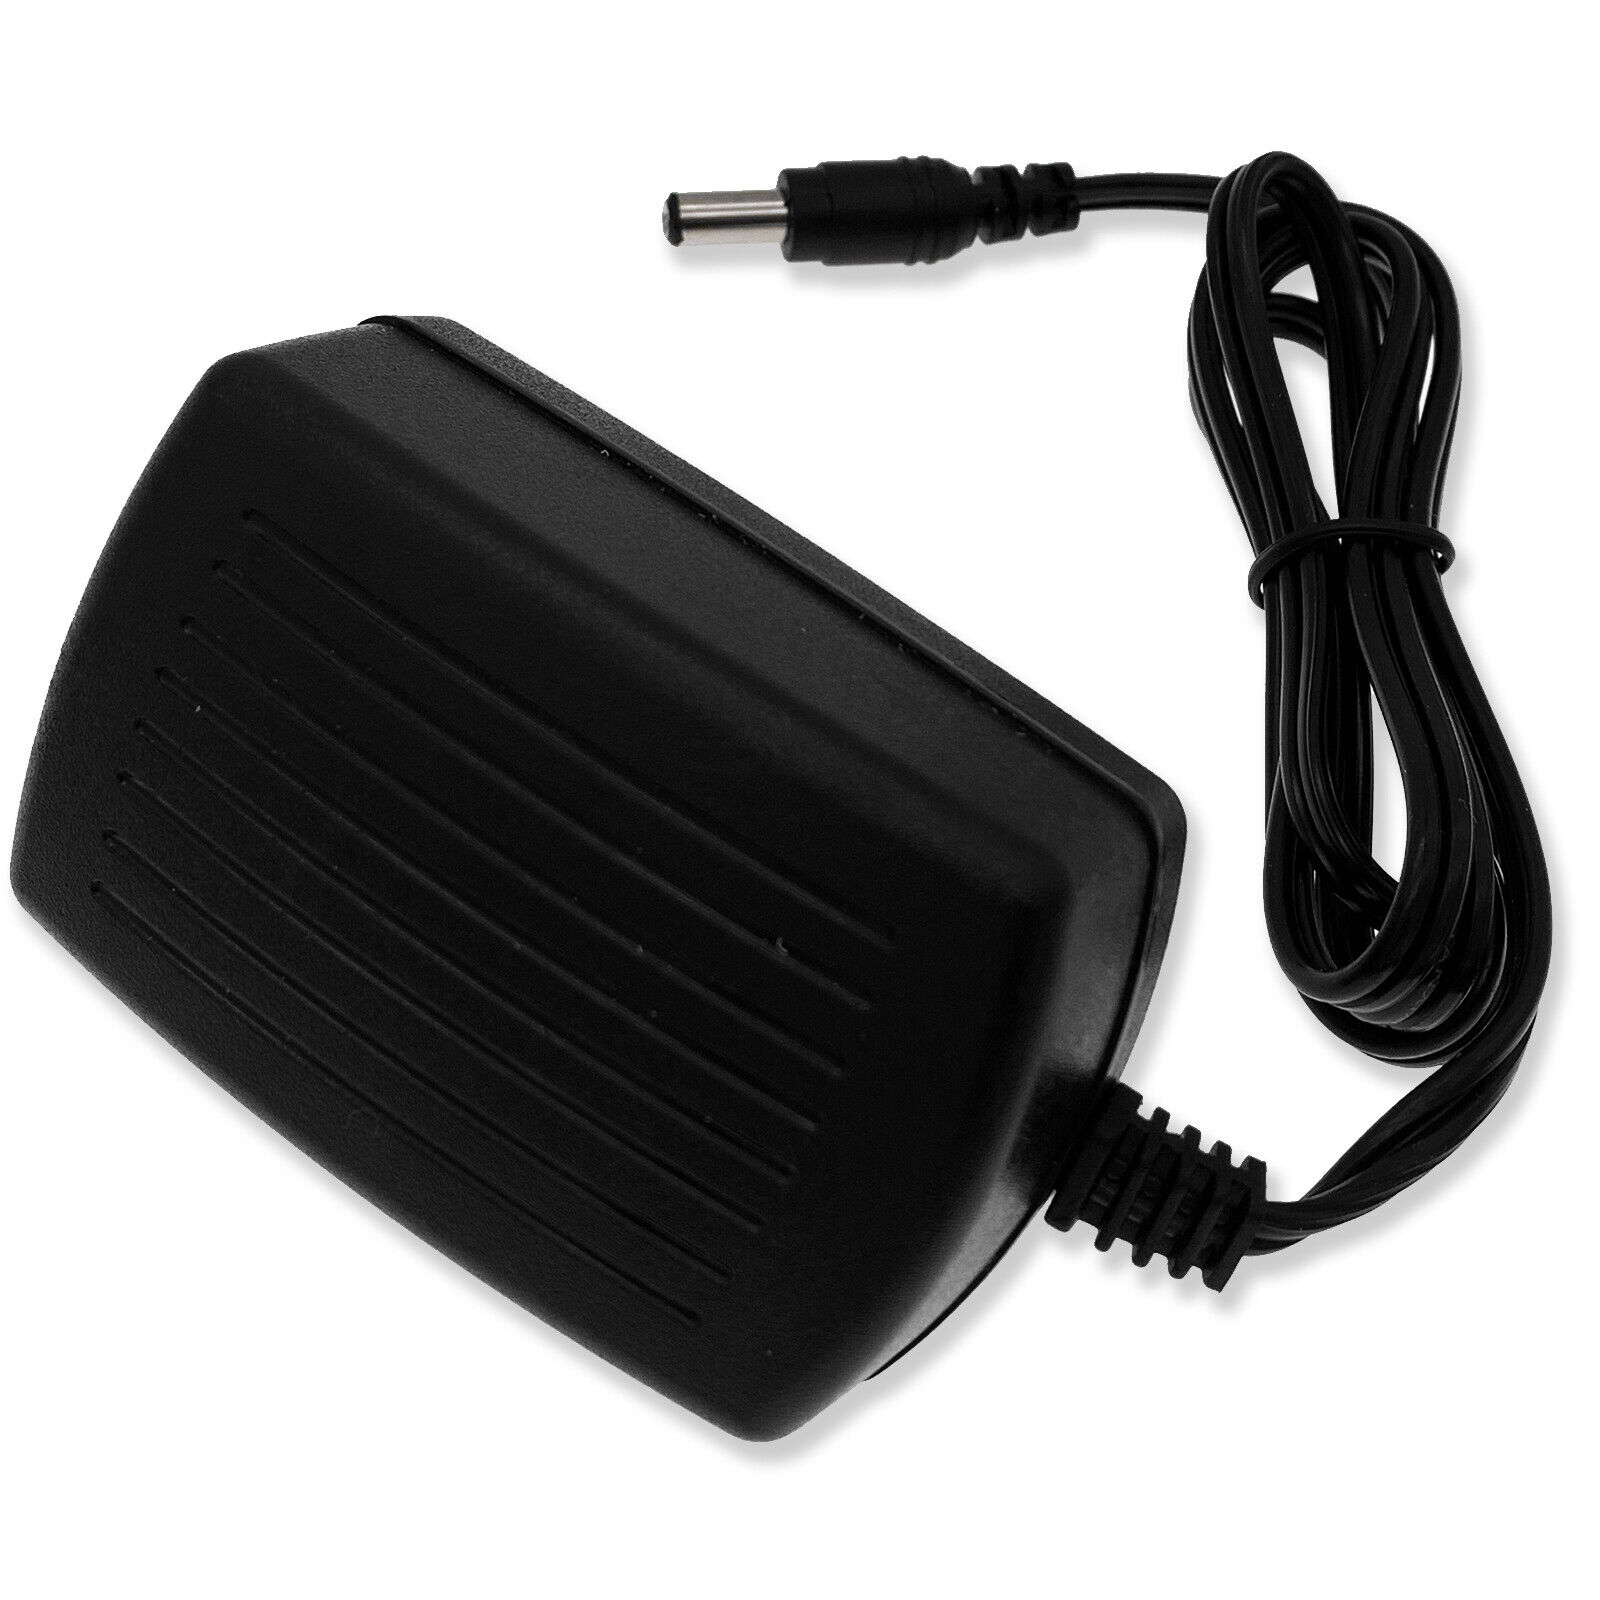 Battery Charger for DC30 DC31 DC34 DC35 DC44 DC45 DC56 & DC57 Charger Adapter Vacuum Cord Connectivity Technology Barre